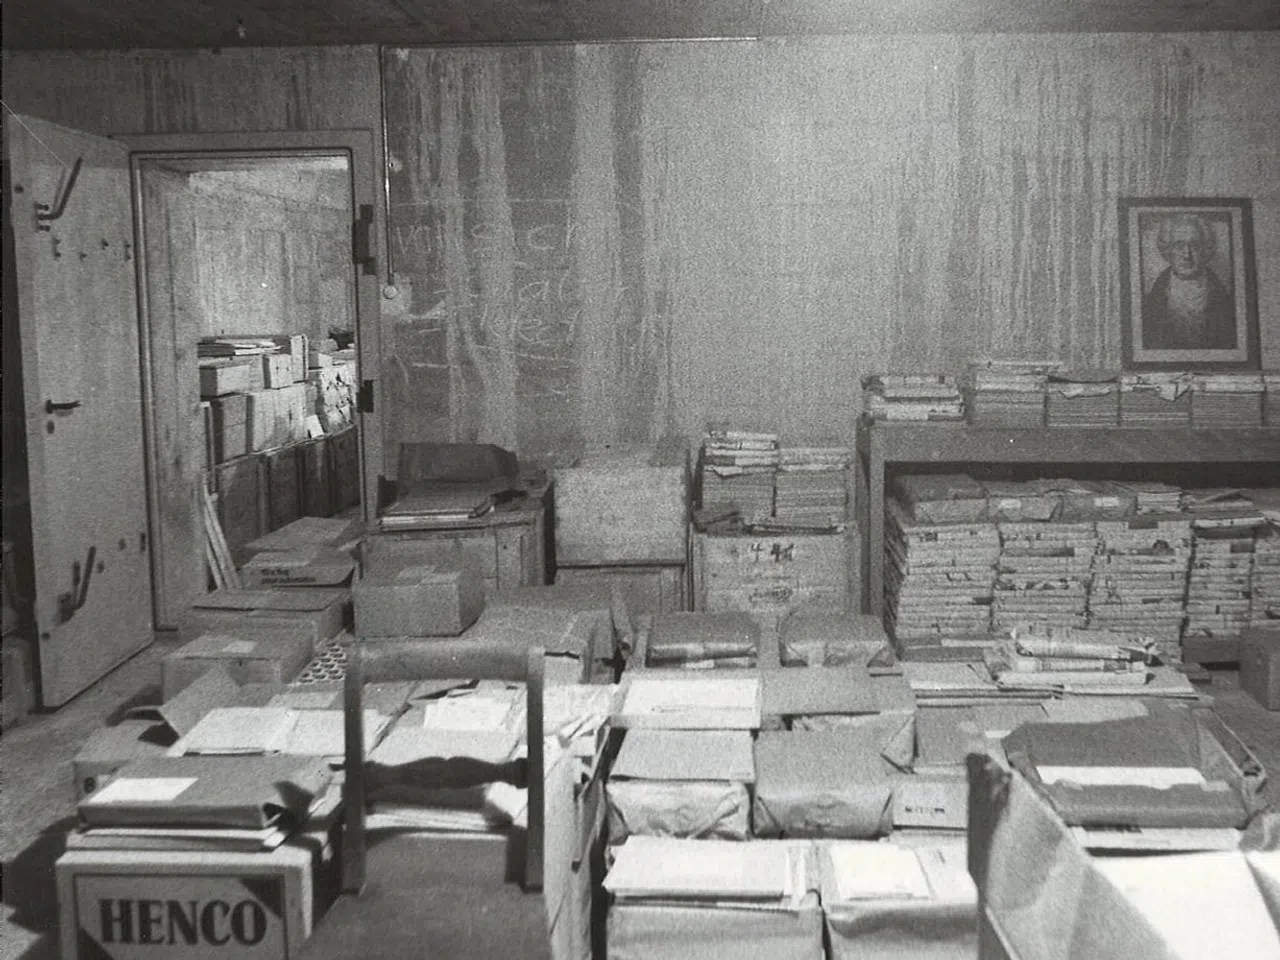 Wilhelm Kaiser's documents were piled up in the basement. In between he slept on a camp bed.